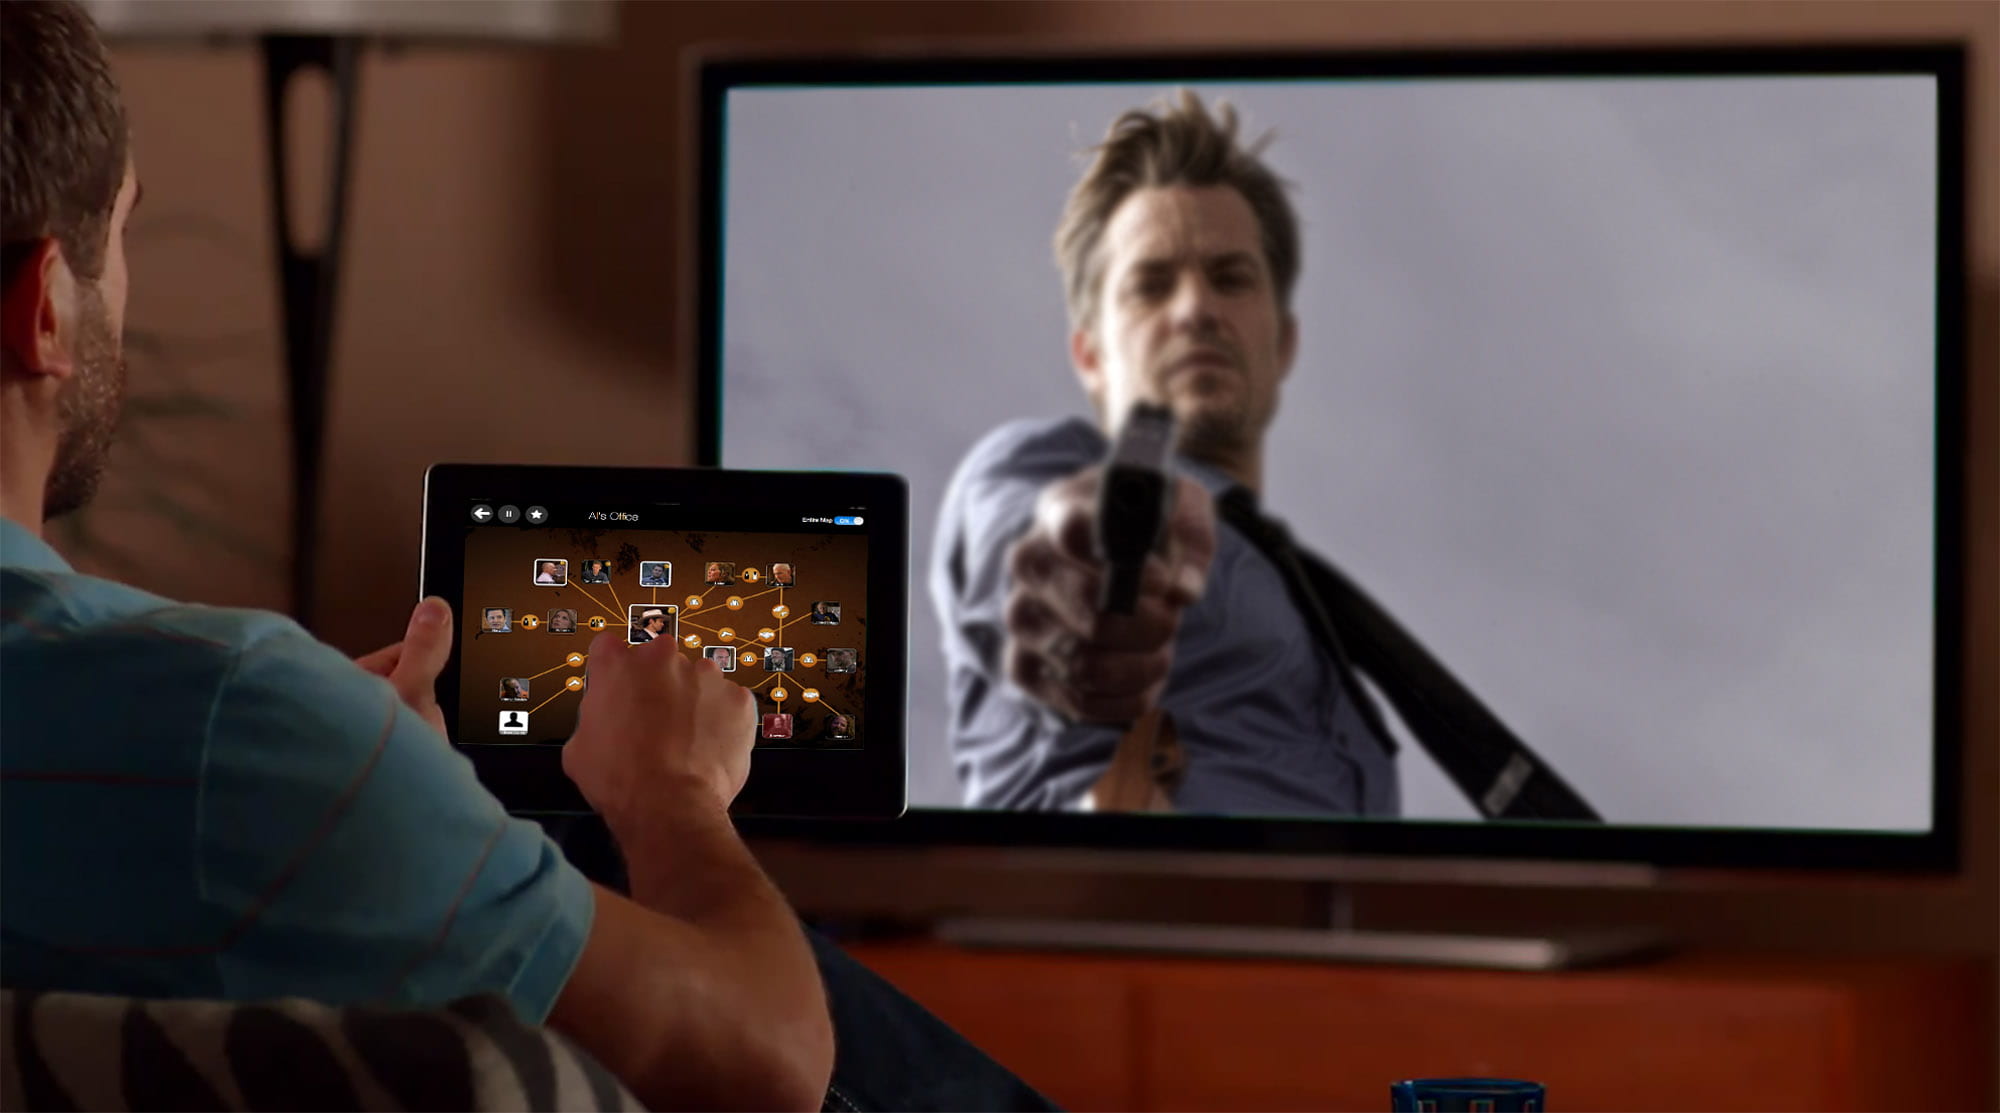 The iPad displays a map of the relationships among the many characters, grouping them geographically as they appear in the story without any spoiler revelations.